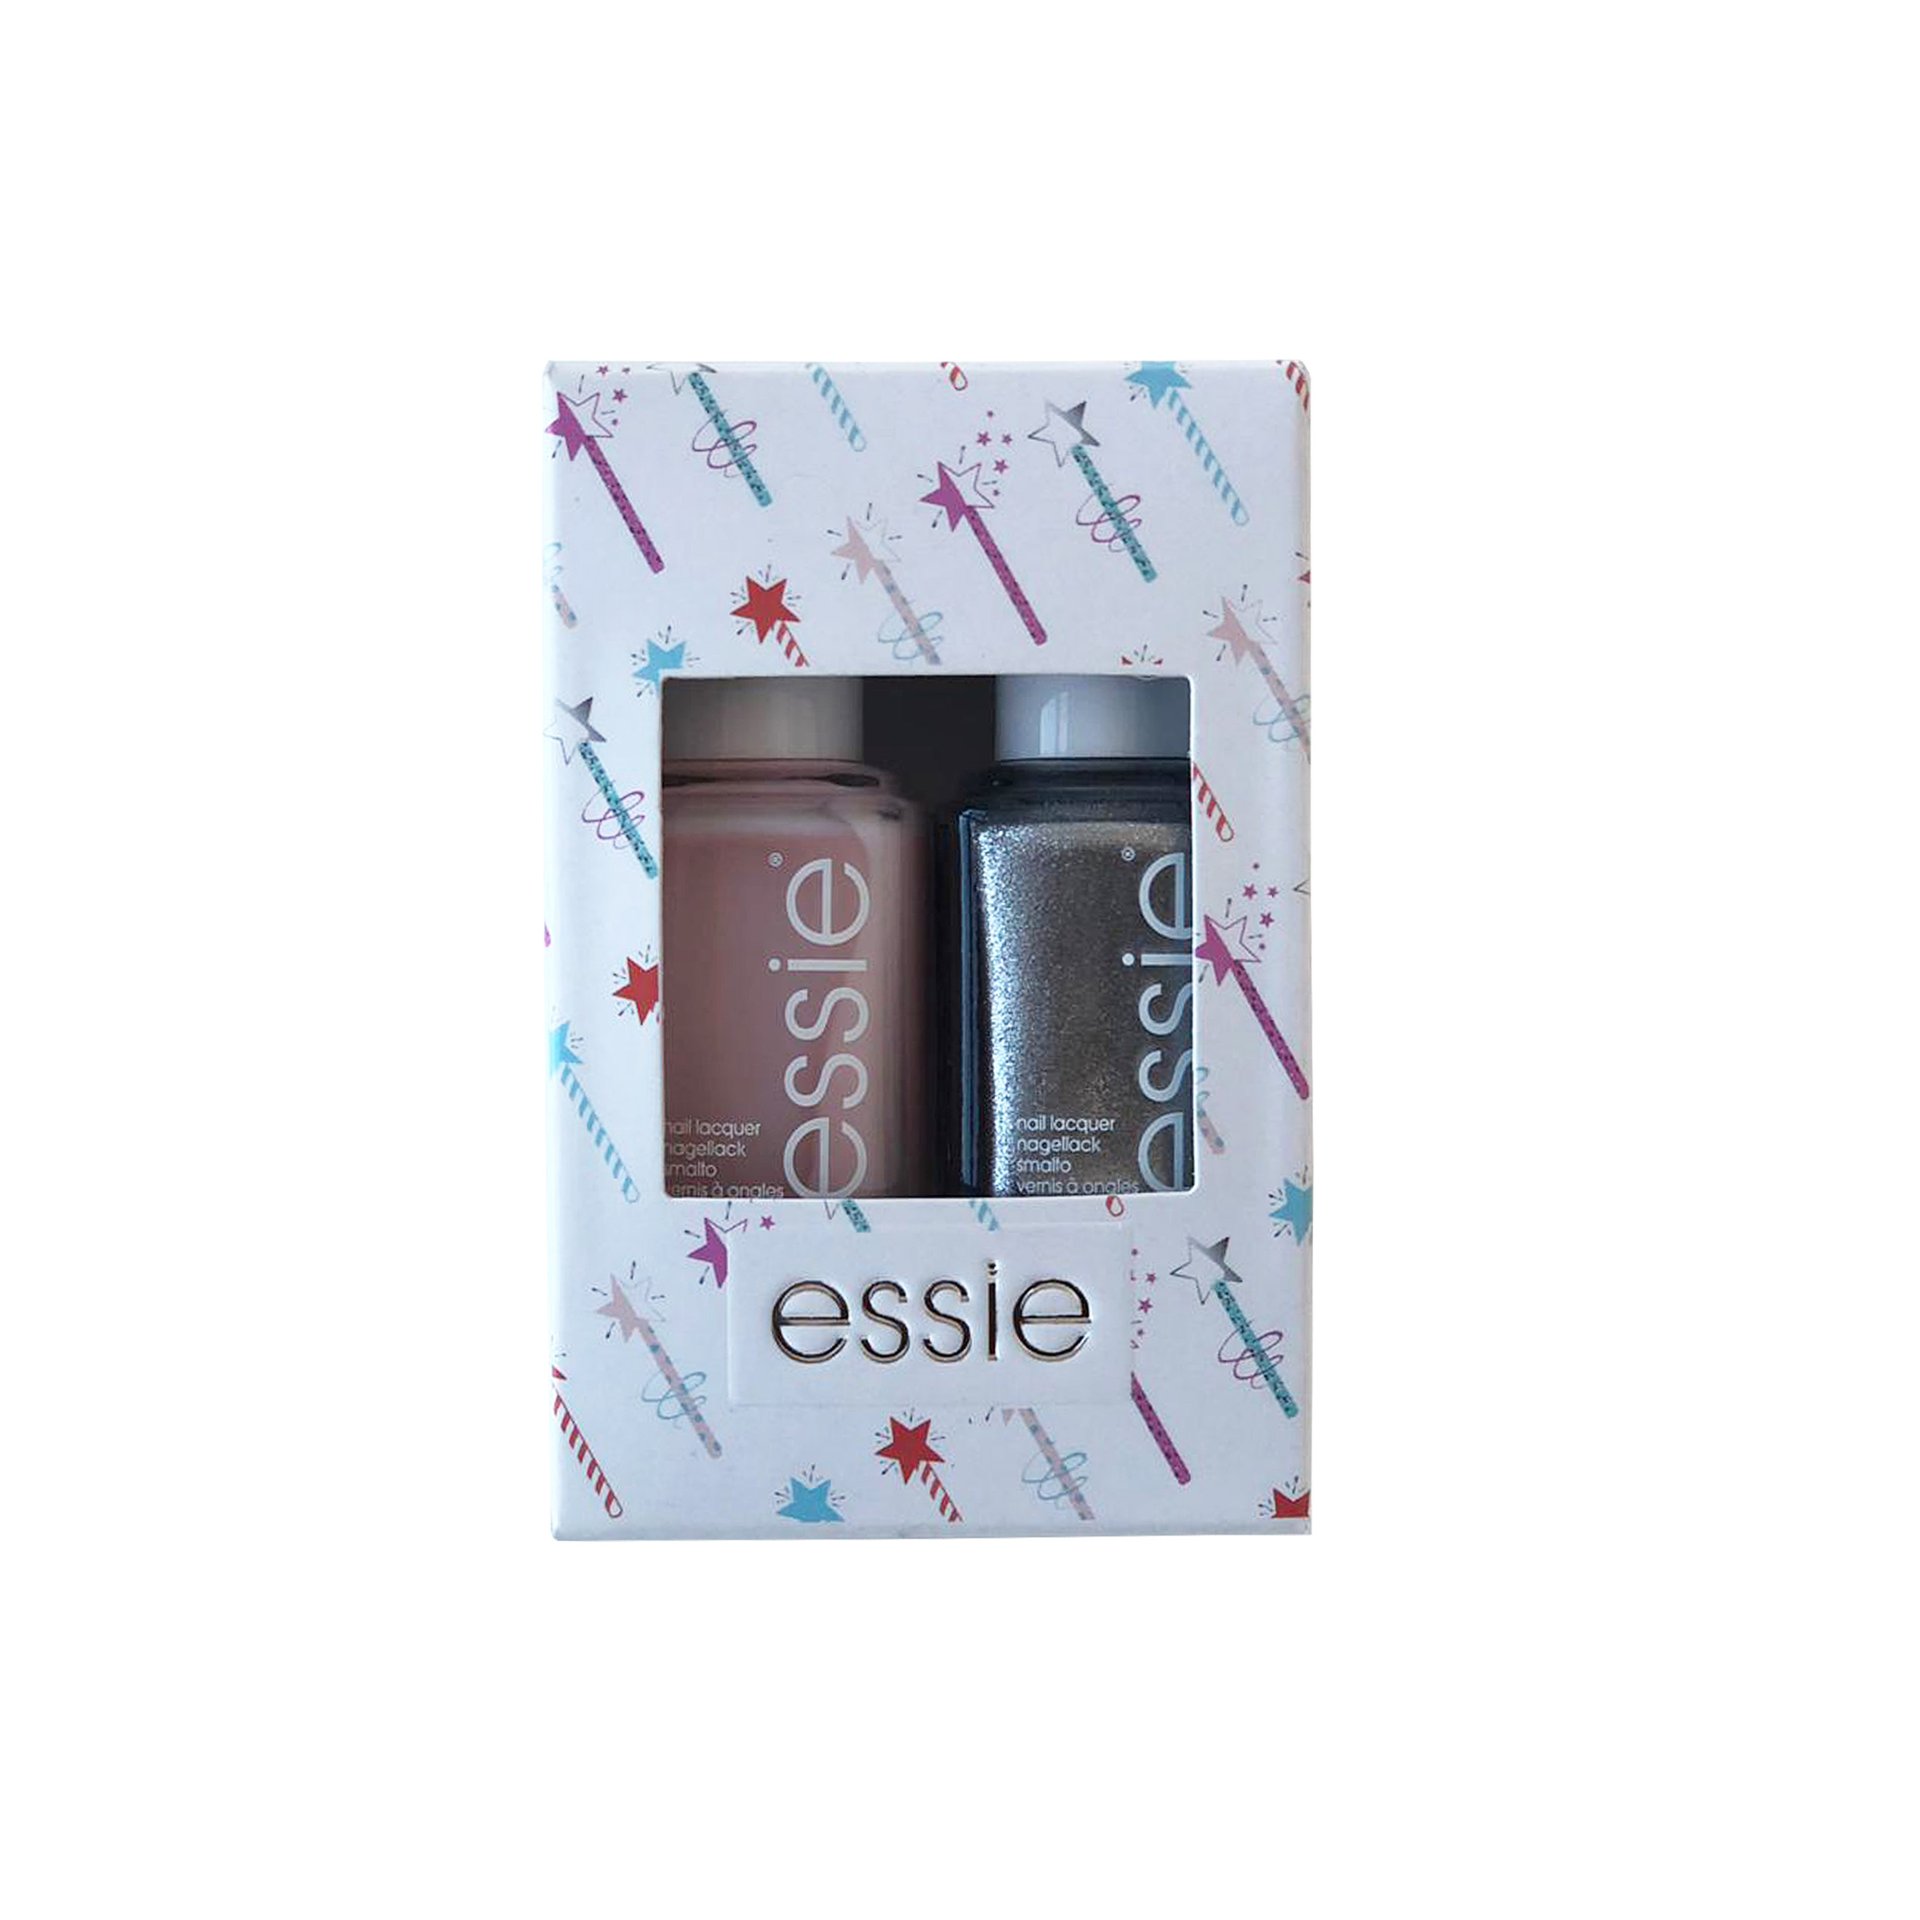 Essie Gel COUTURE Nail Polish 0.46oz SHEER SILHOUETTE - Etsy Sweden